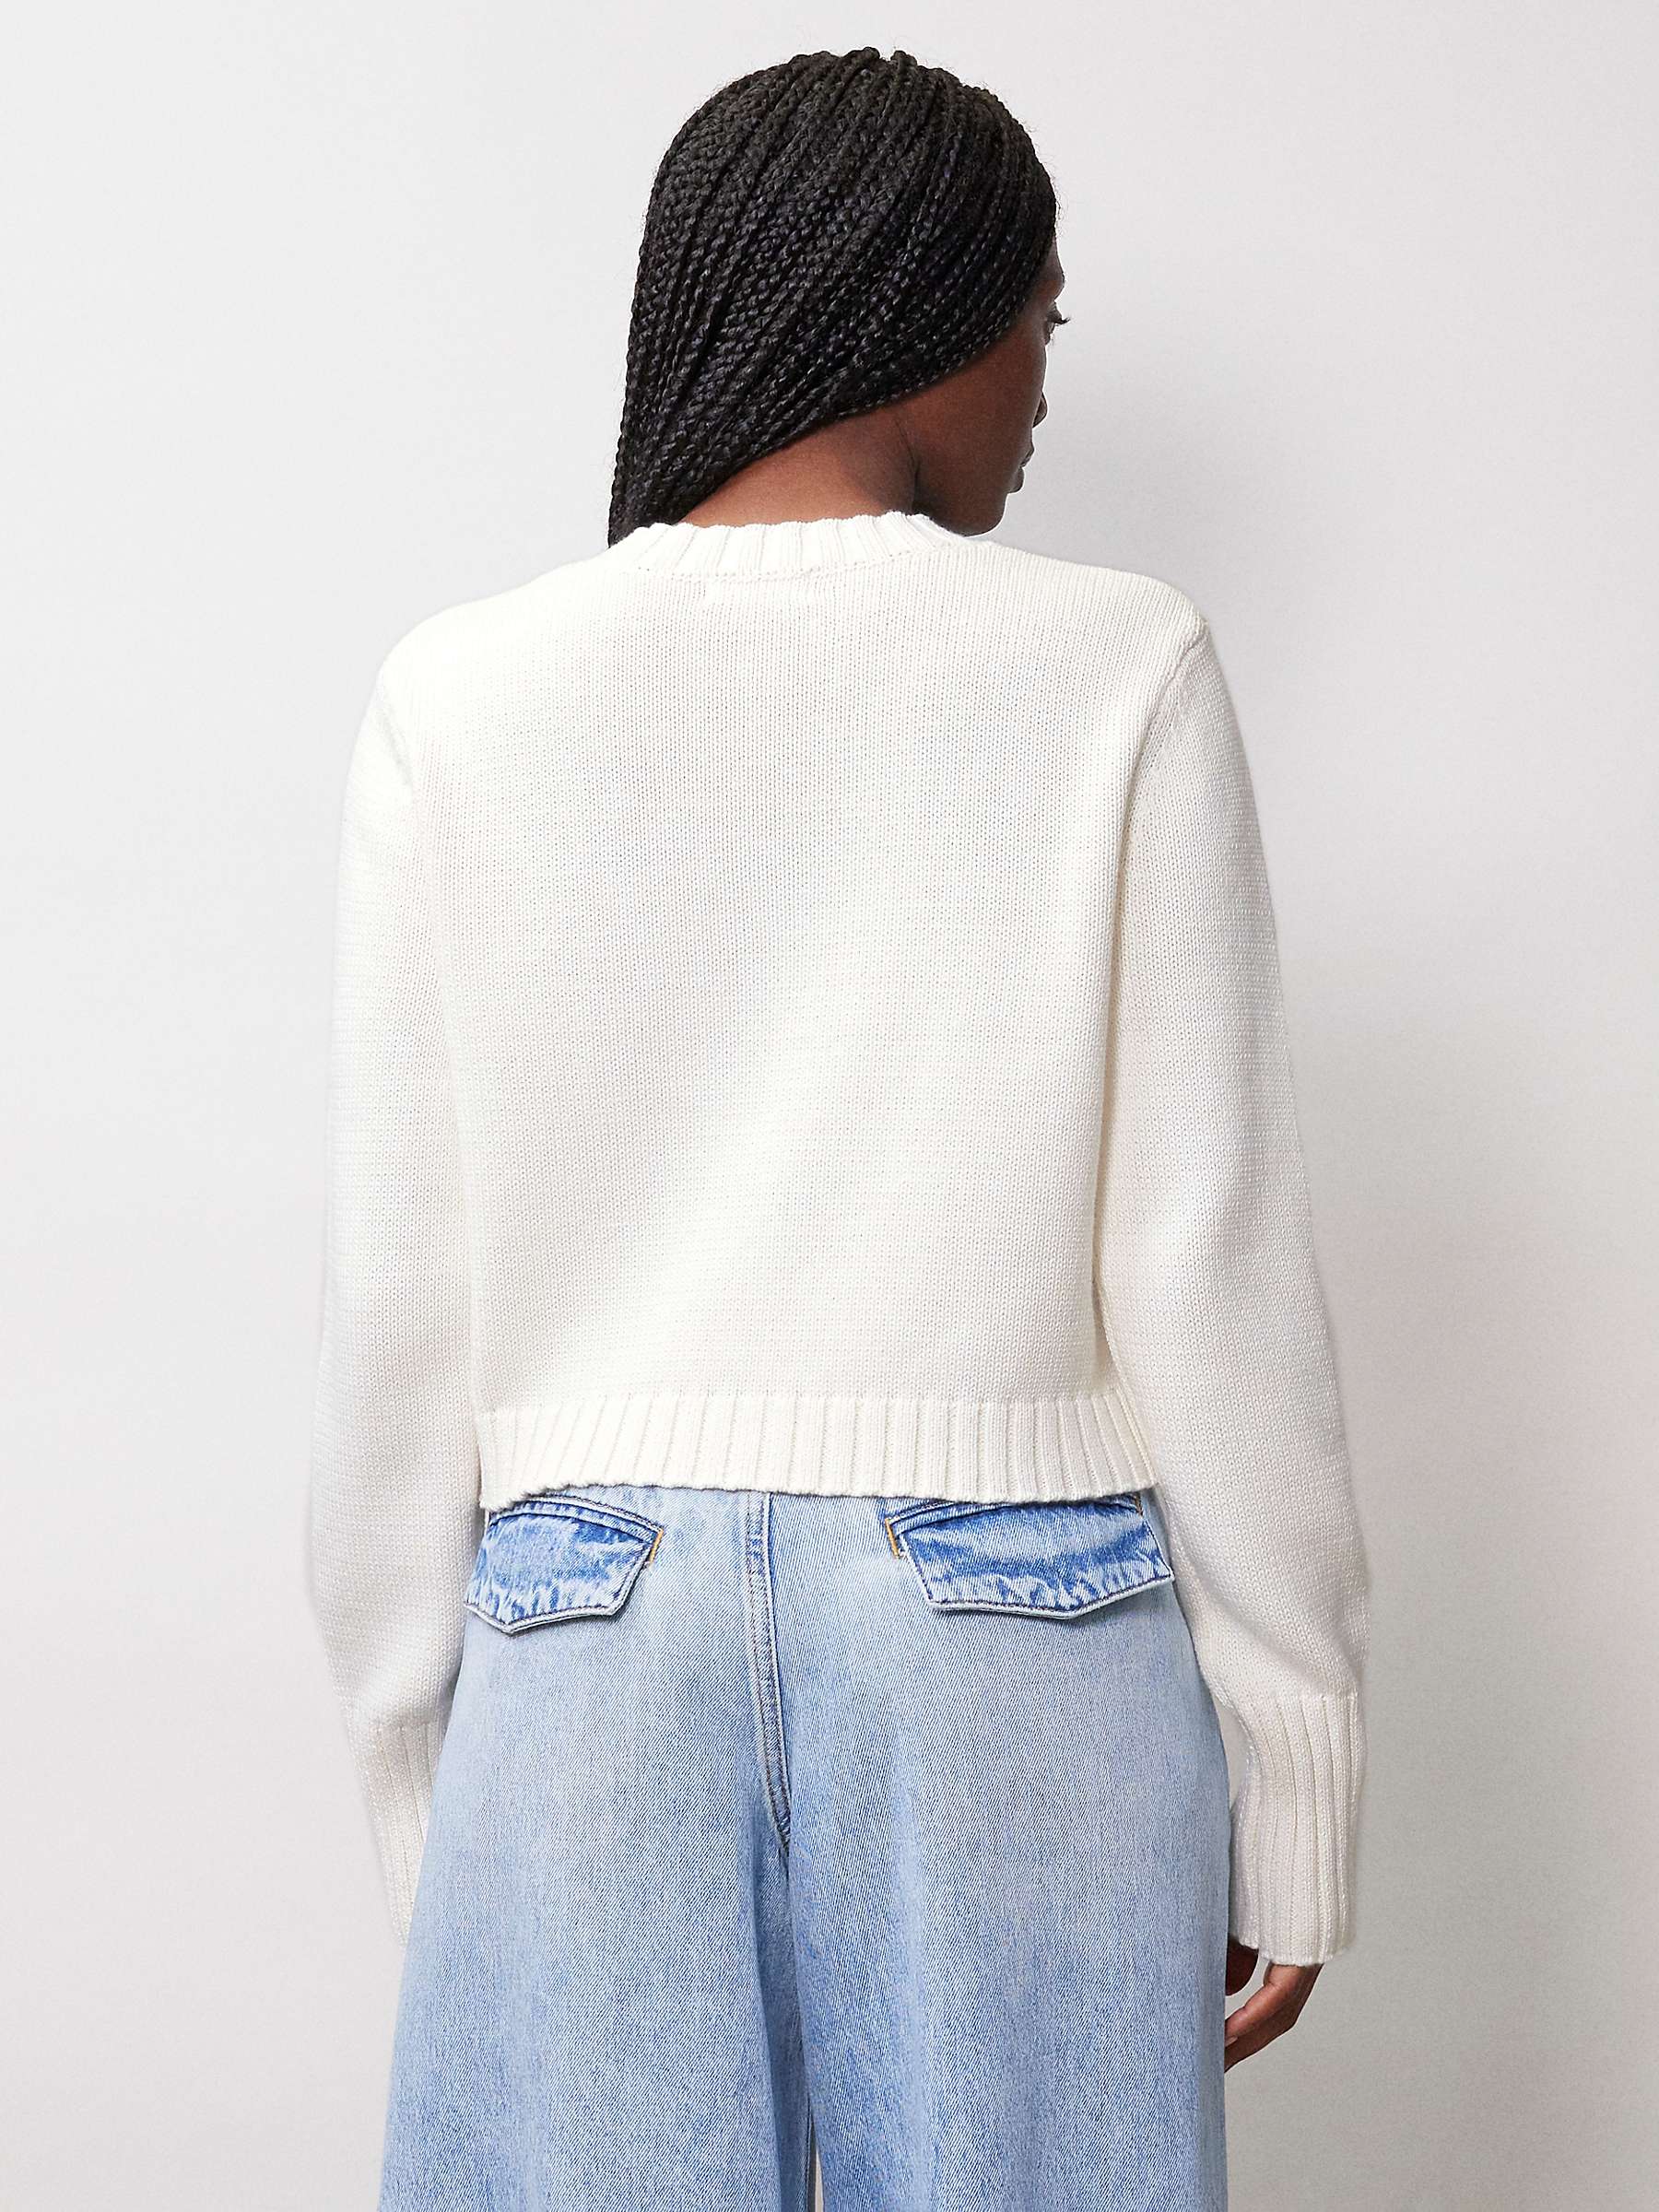 Buy Albaray Cotton Cropped Cardigan Online at johnlewis.com